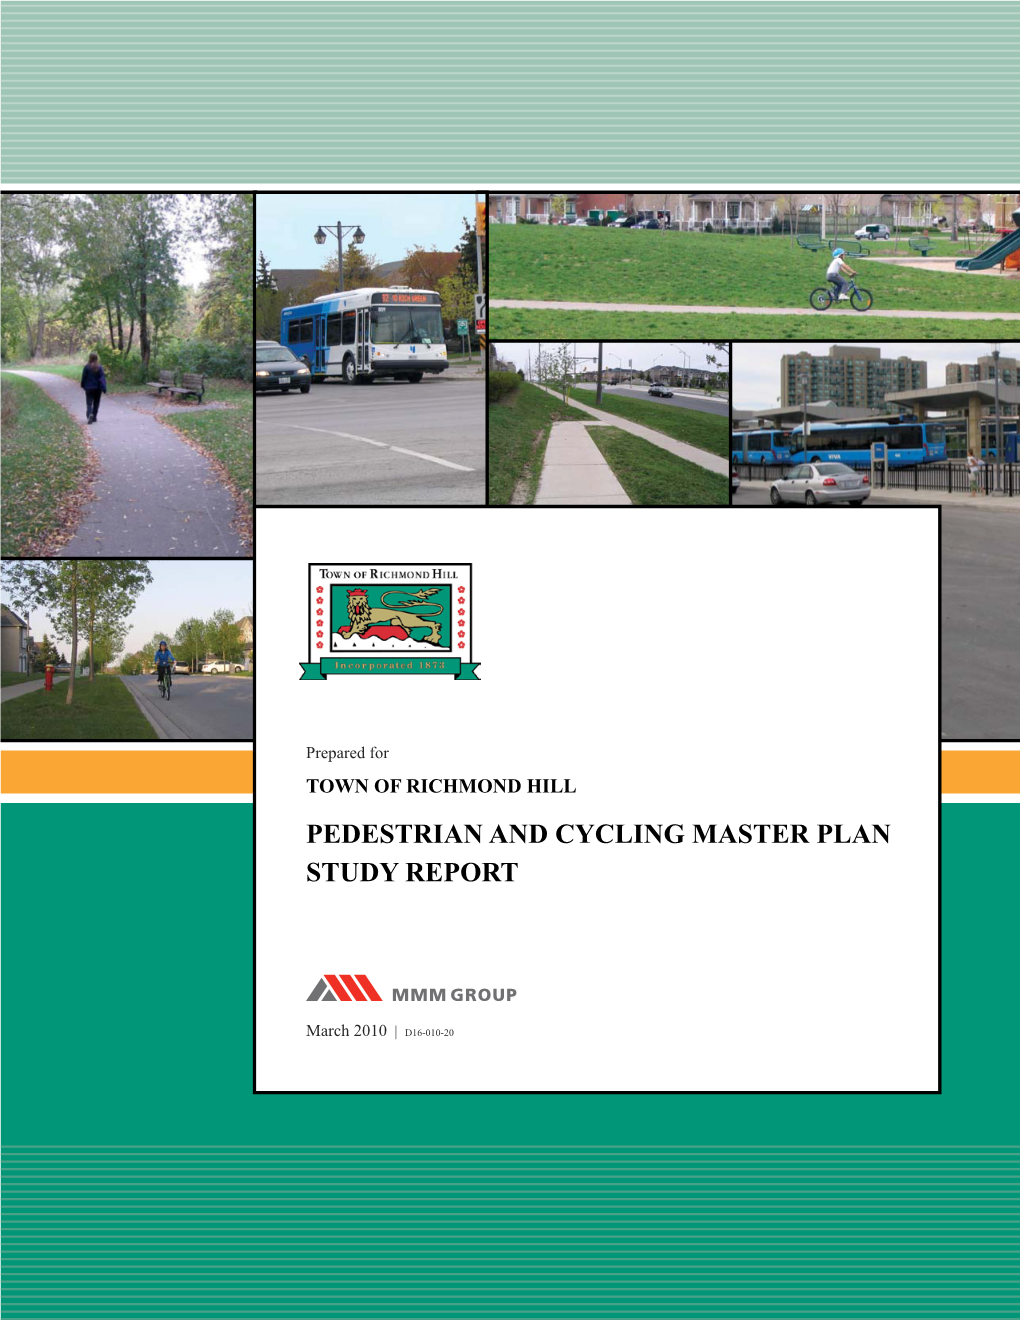 Pedestrian and Cycling Master Plan Study Report